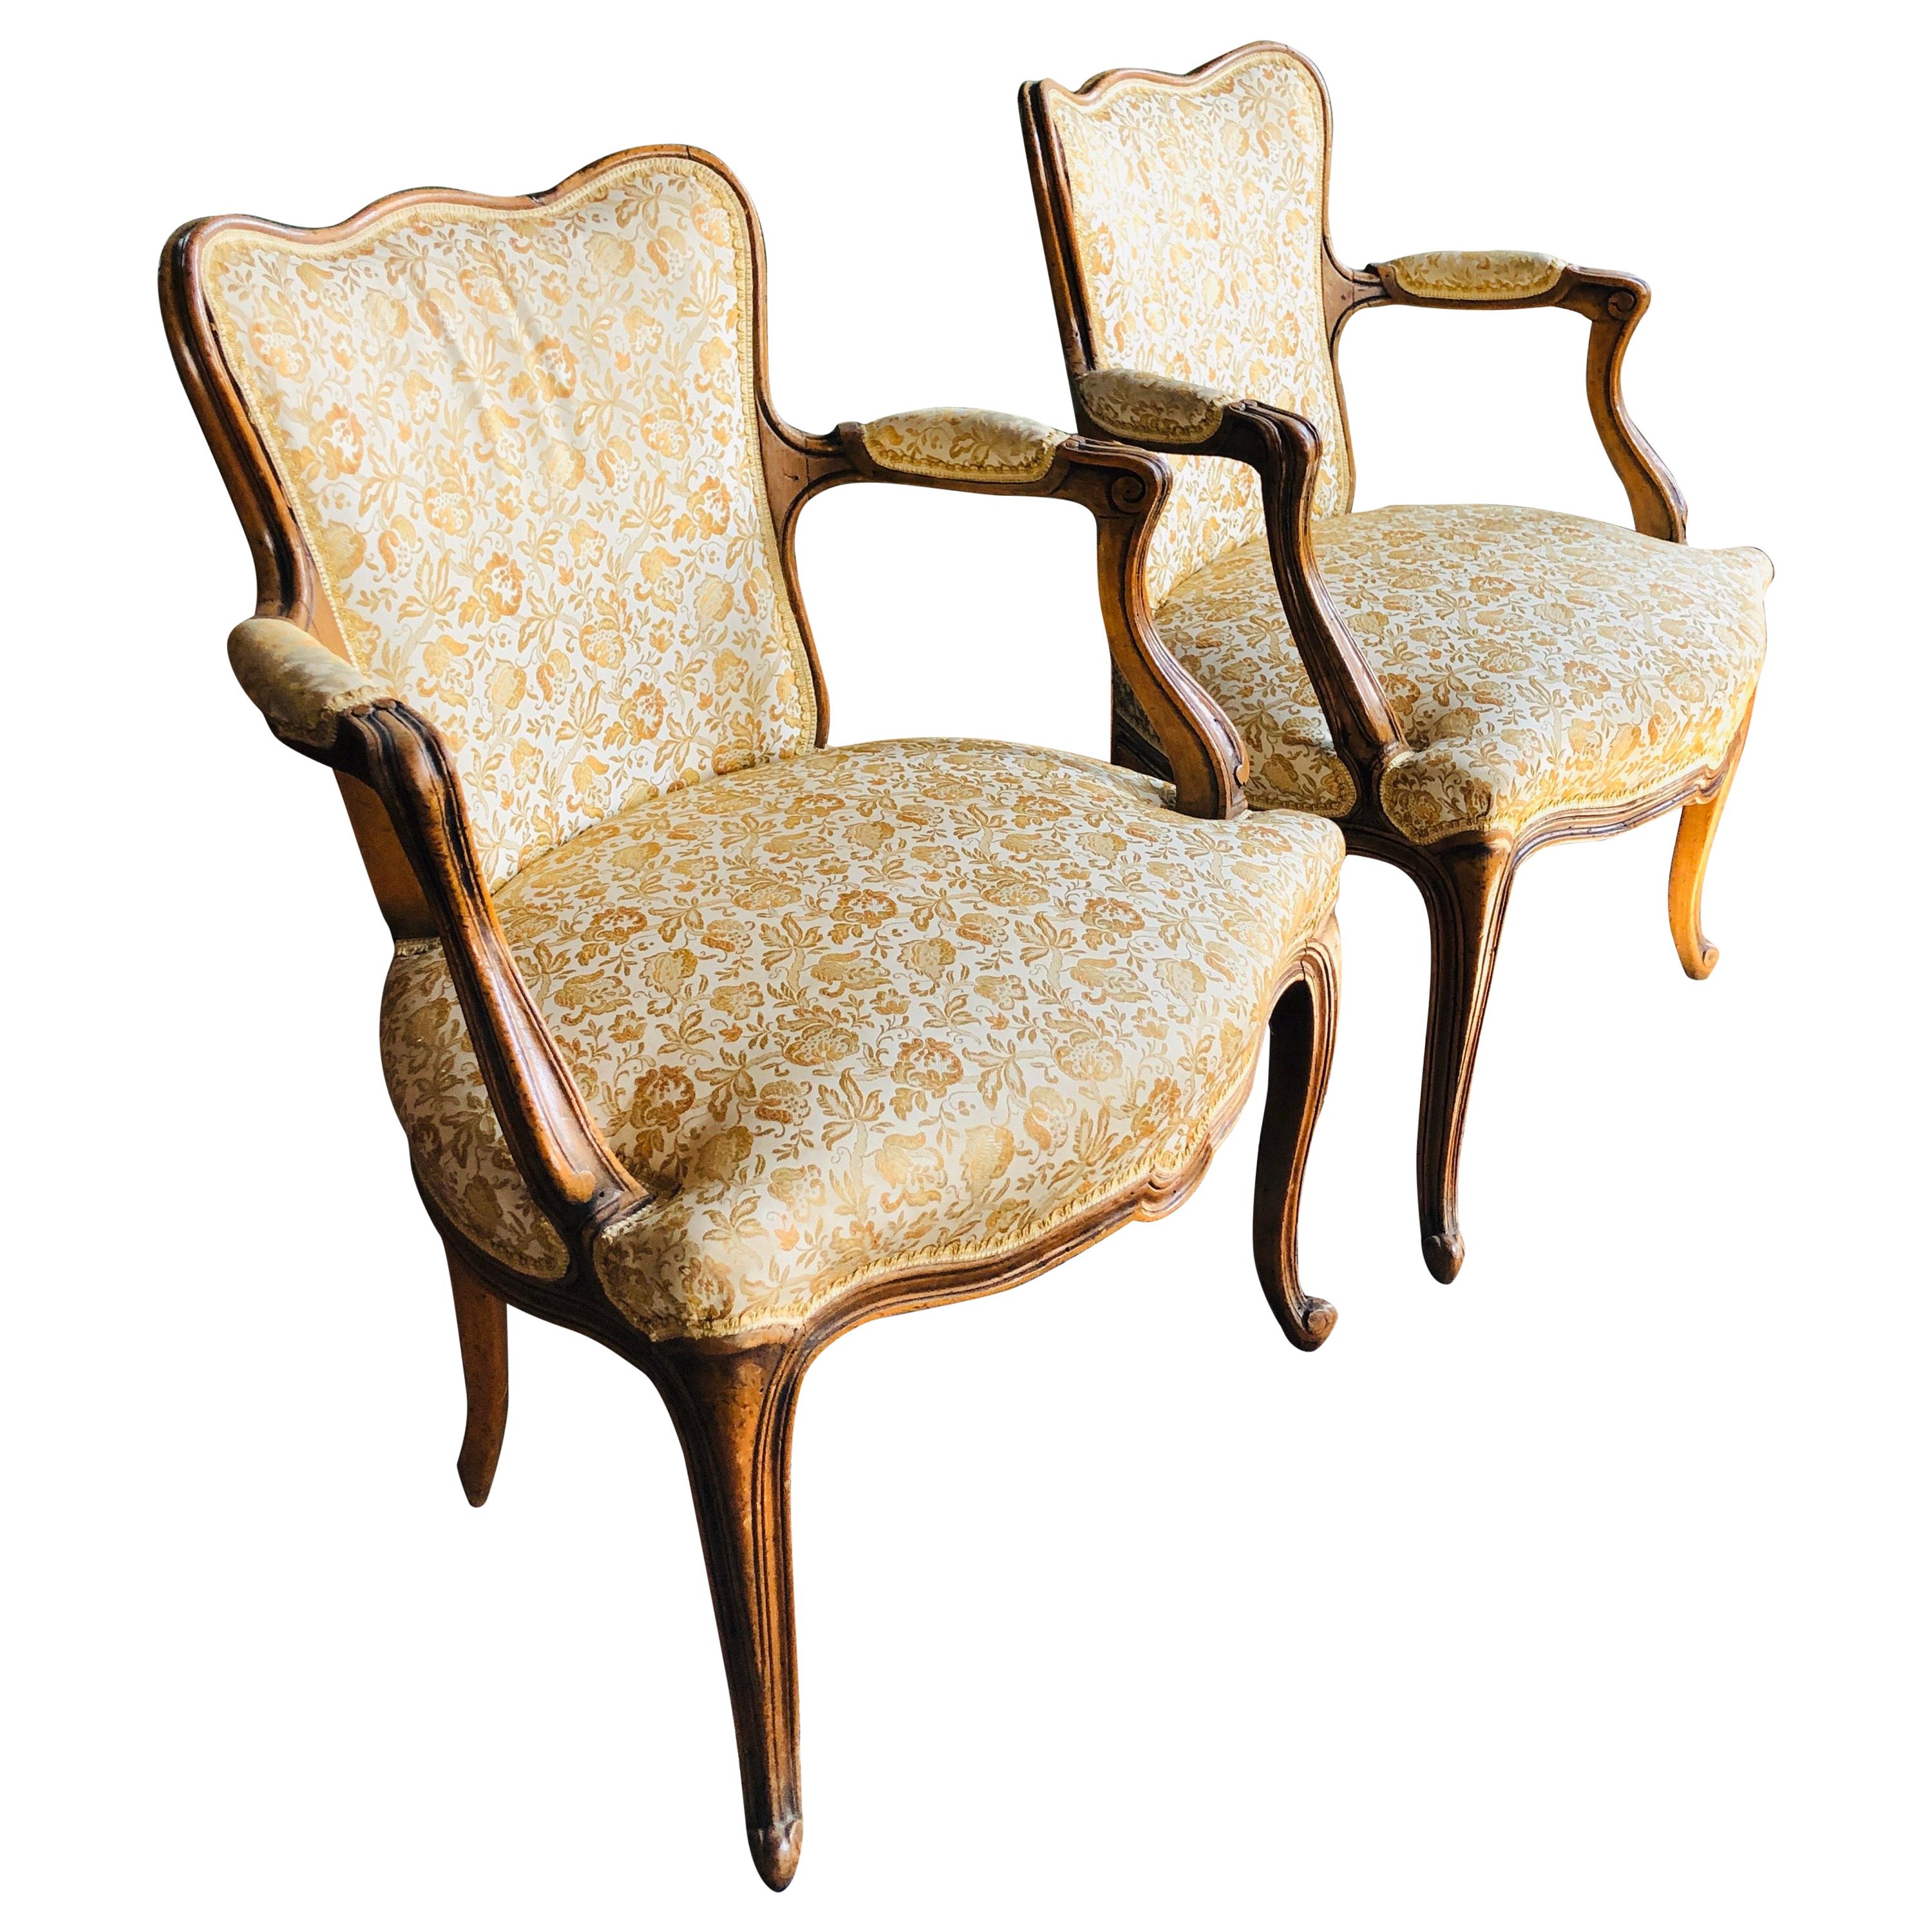 Elegant Pair of Antique French Armchairs in Louis XV Style, circa 1880 For Sale